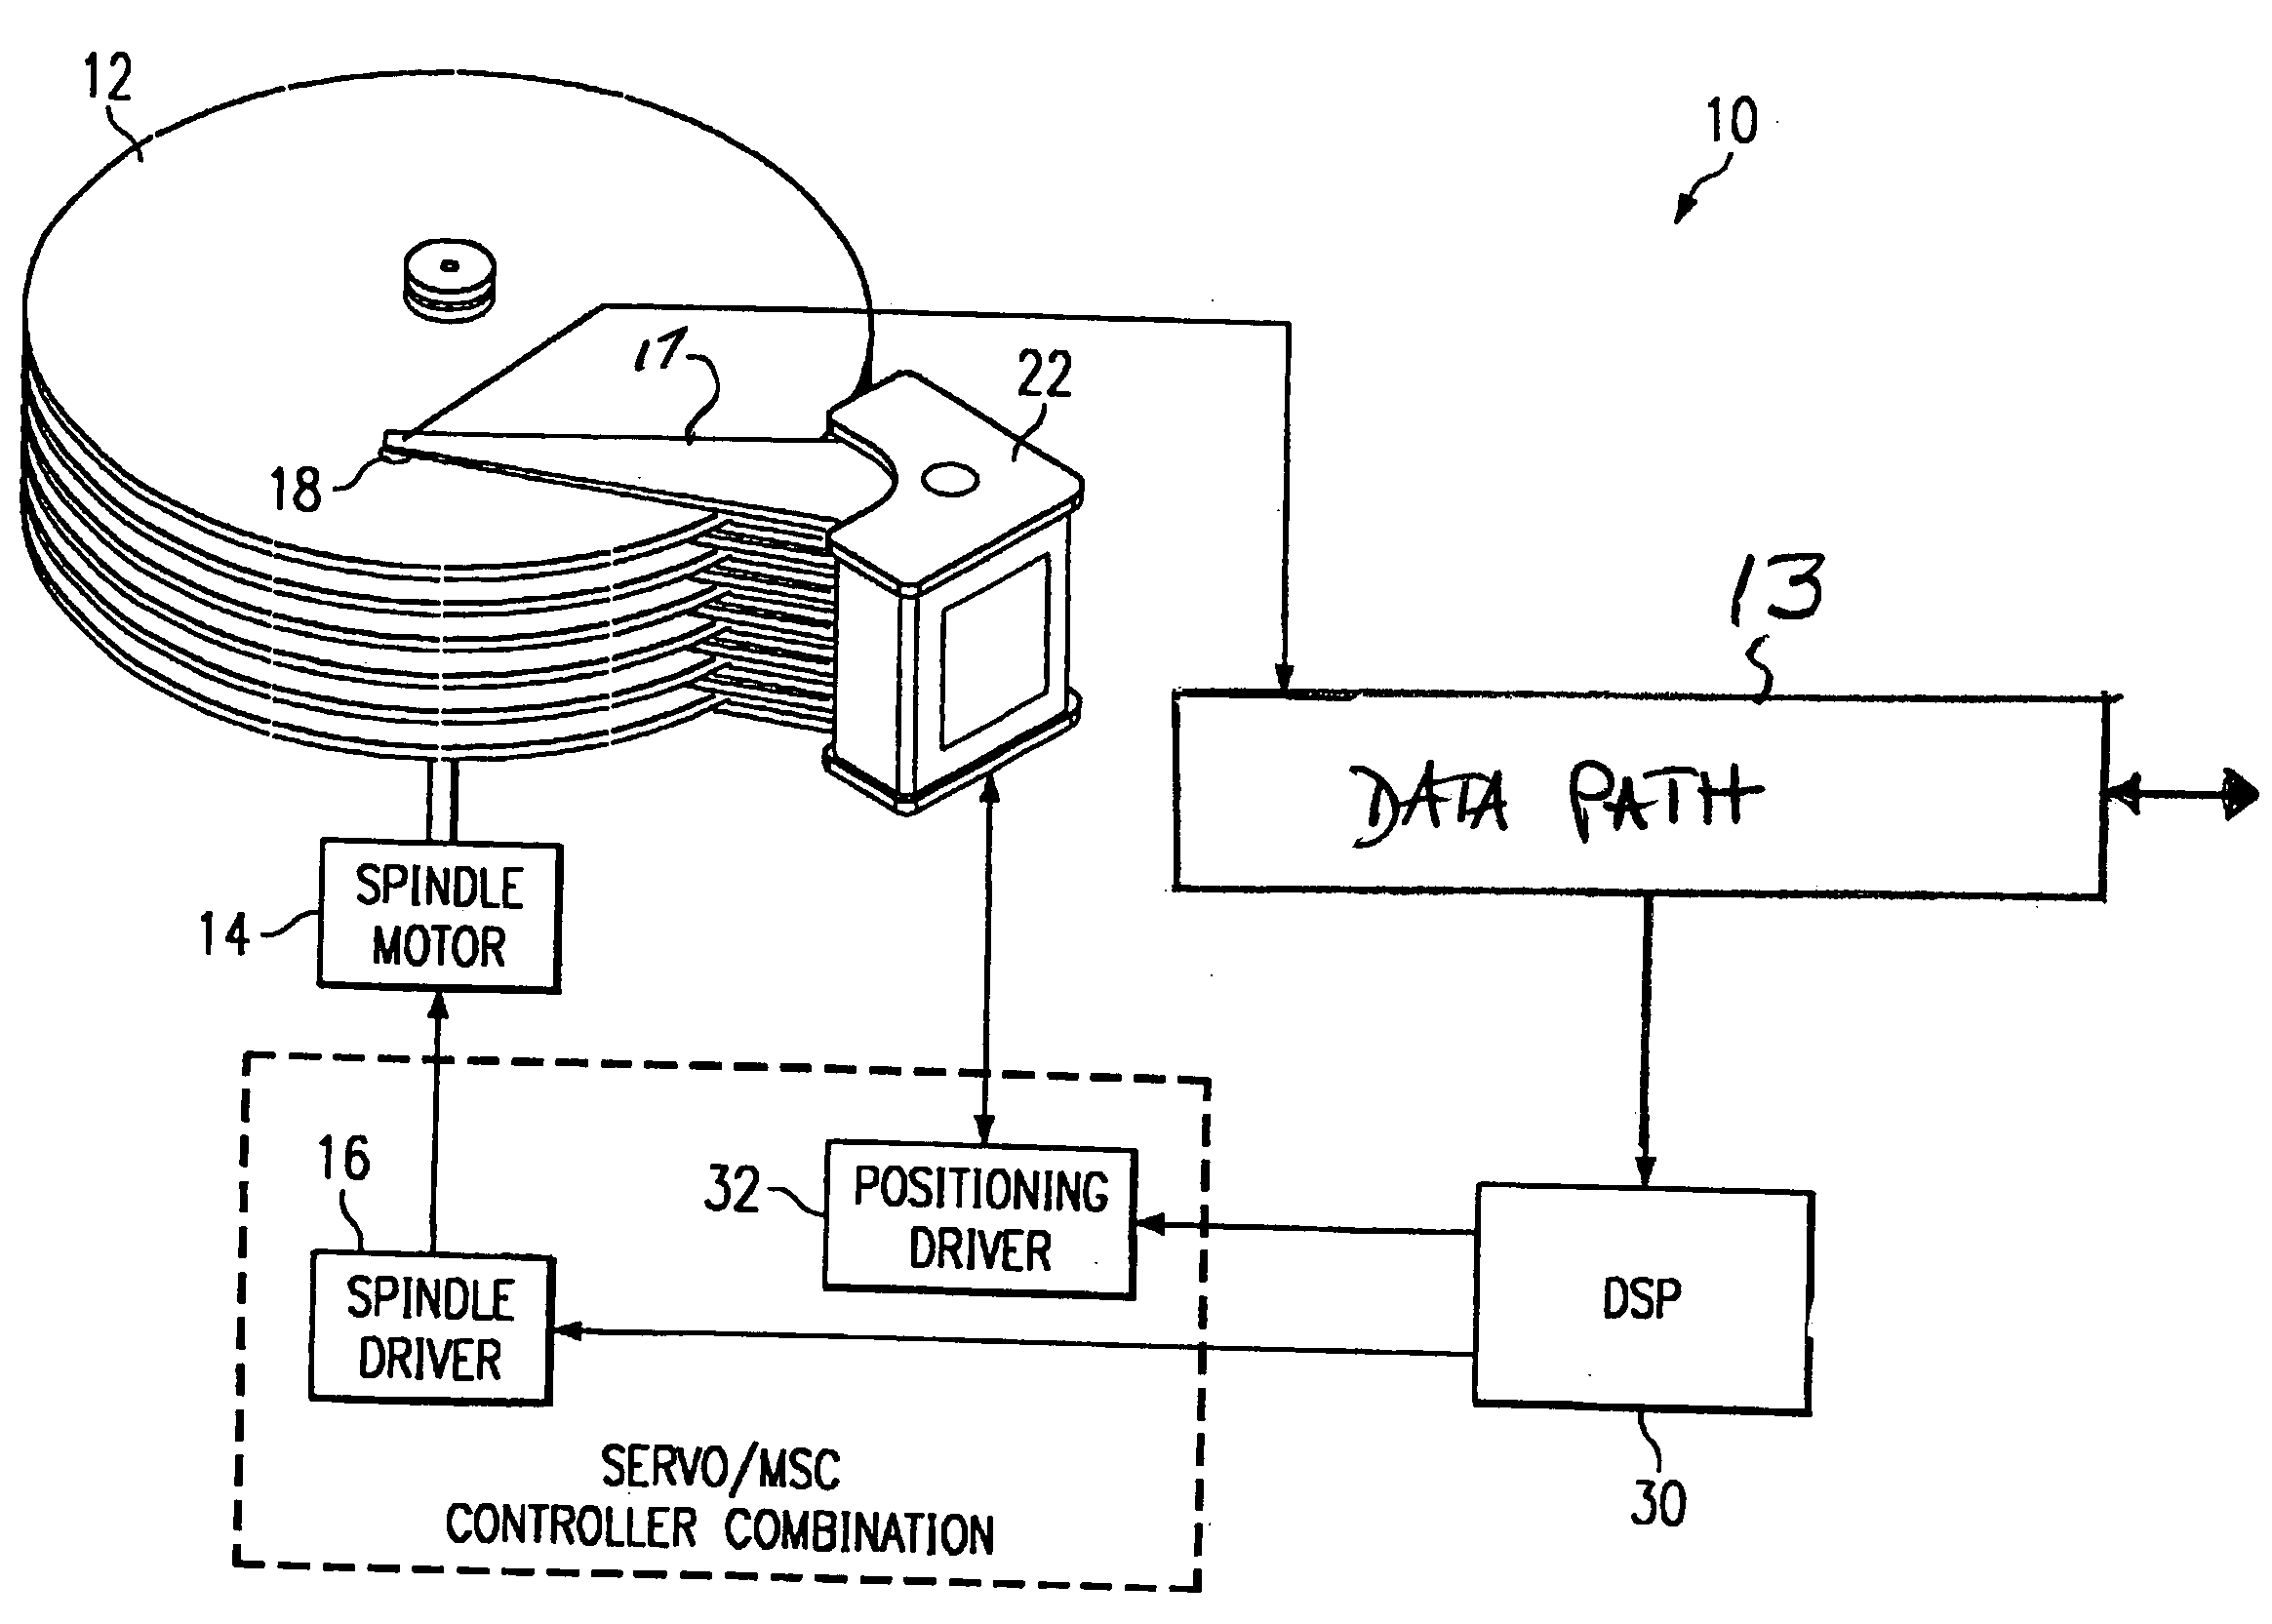 Efficient transition from class d to linear operation in dual-mode voice coil motor controllers